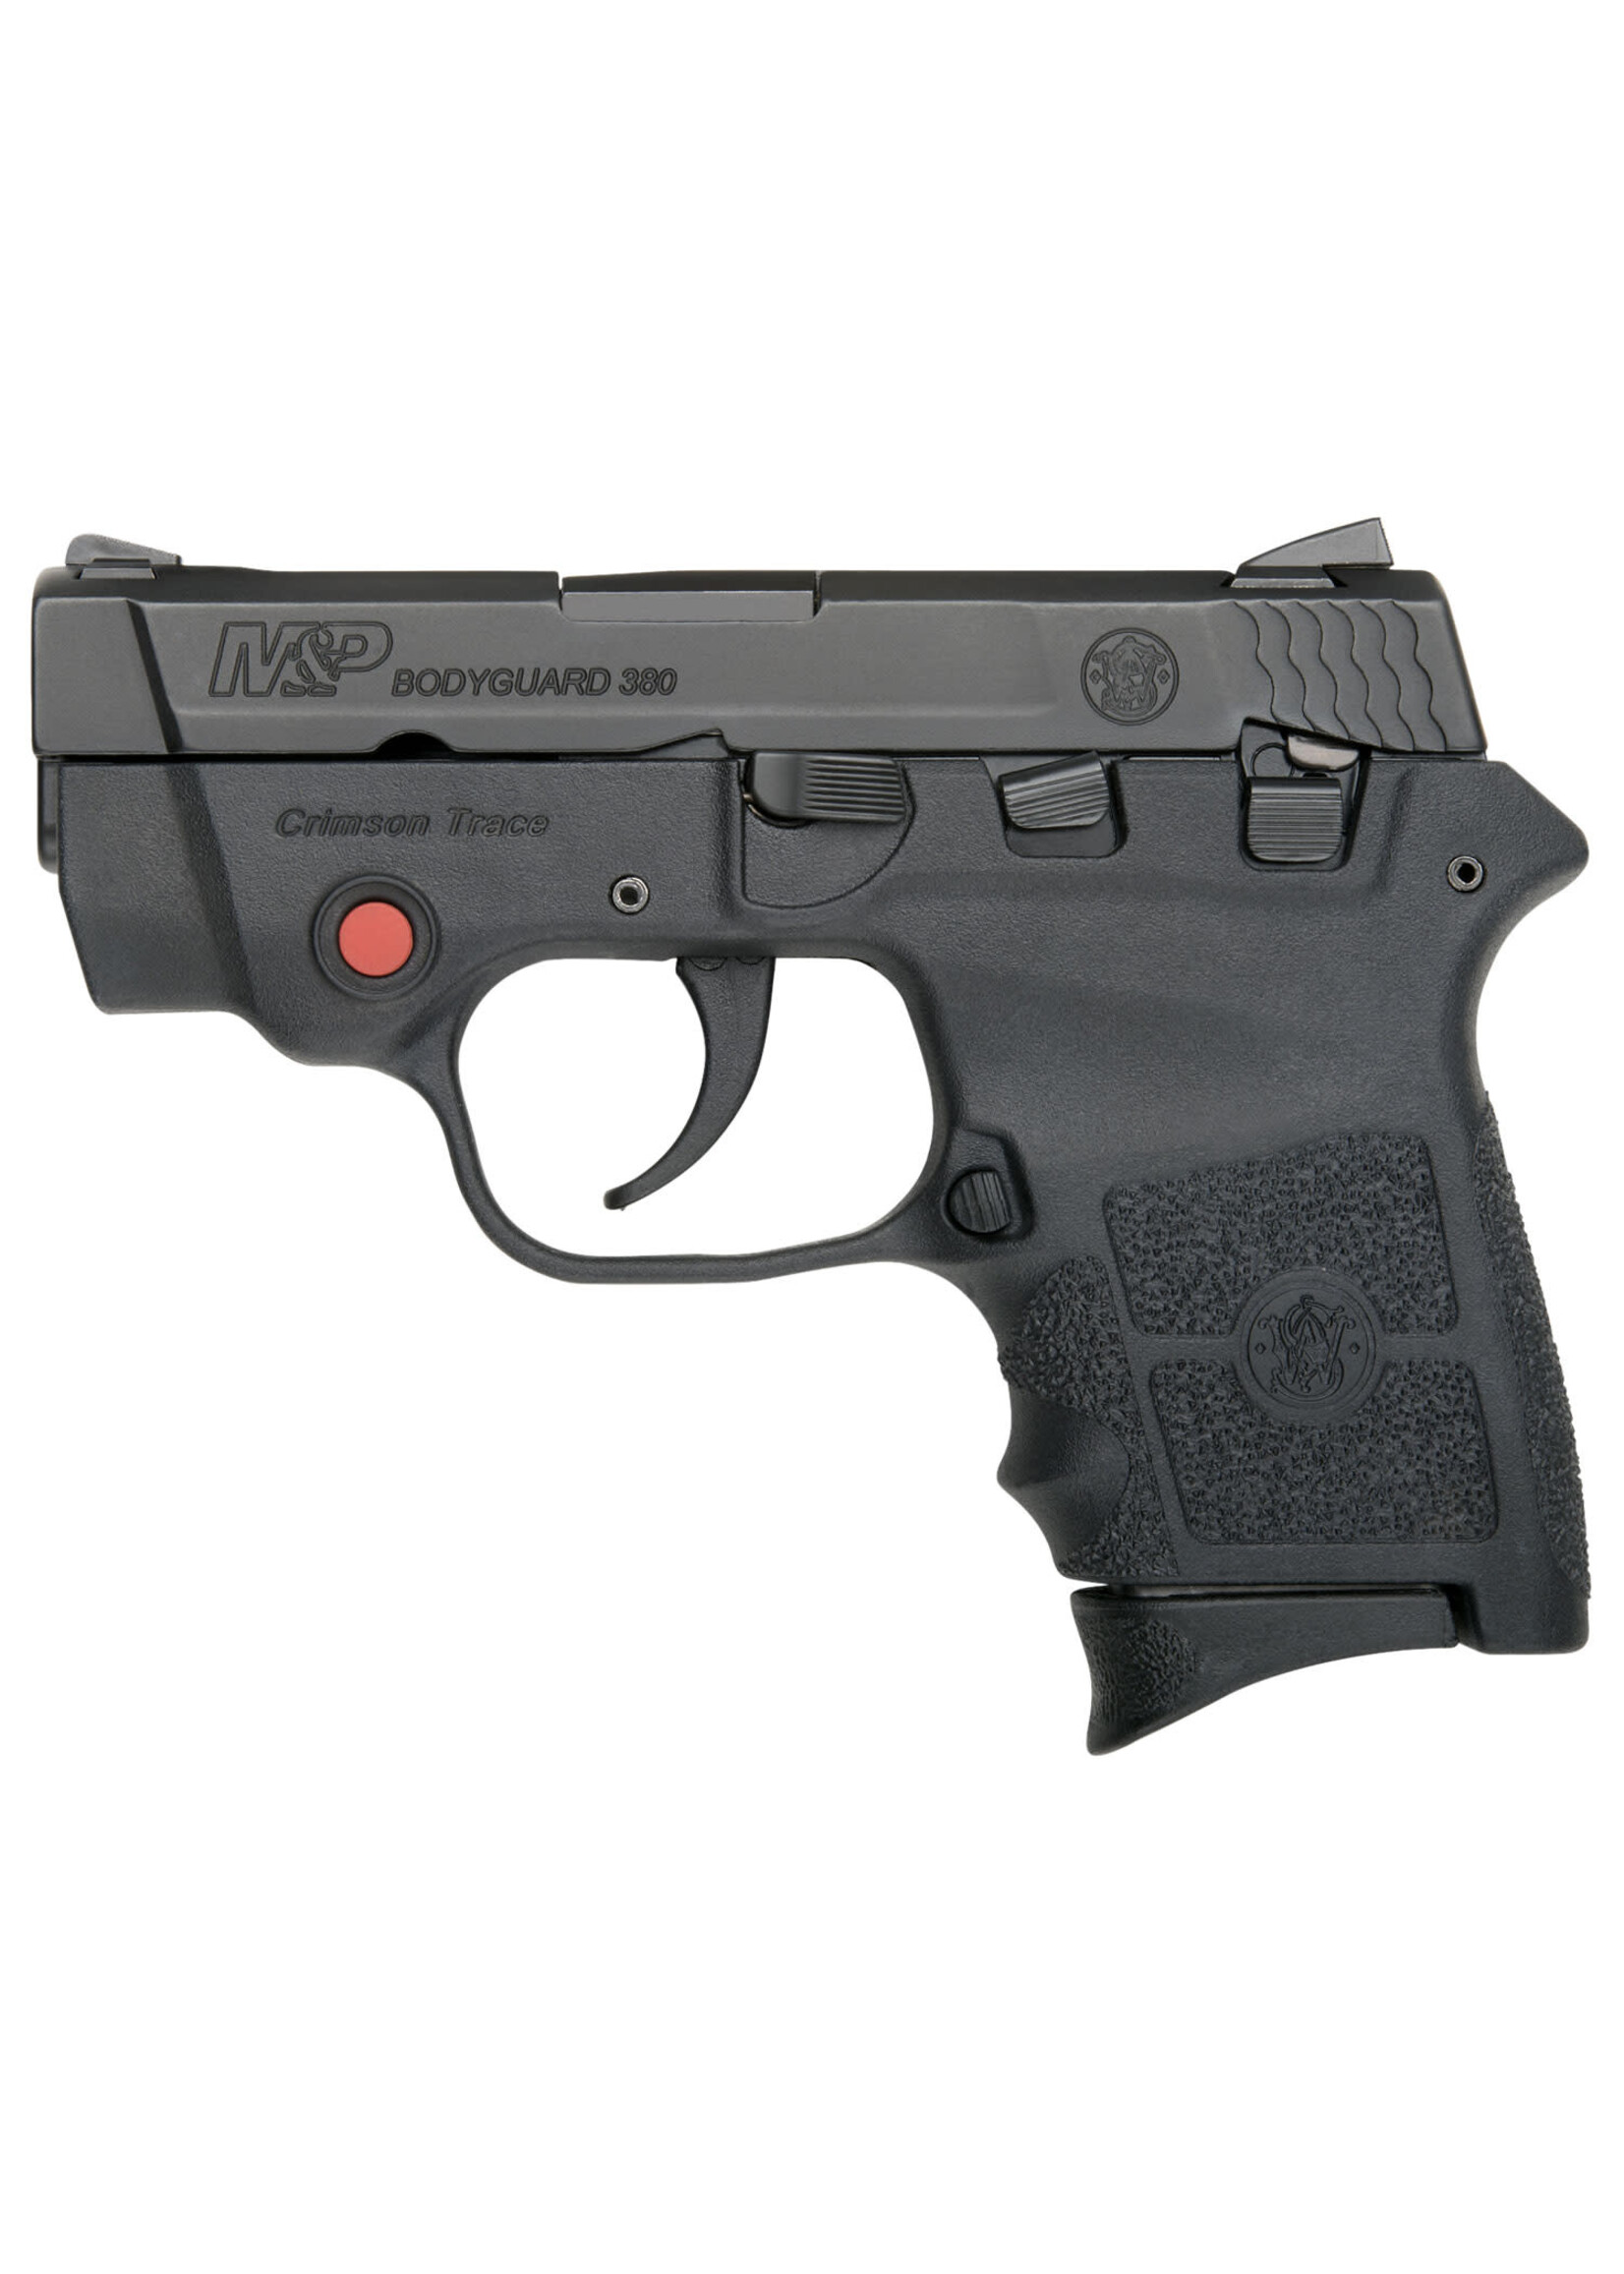 Smith and Wesson (S&W) Smith & Wesson 10048 M&P Bodyguard w/CT Laser Micro-Compact Frame 380 ACP 6+1, 2.75" Black Stainless Steel Barrel, Black Armornite Serrated Stainless Steel Slide, Matte Black Polymer Frame & Finger Grooved Grip, Ambidextrous